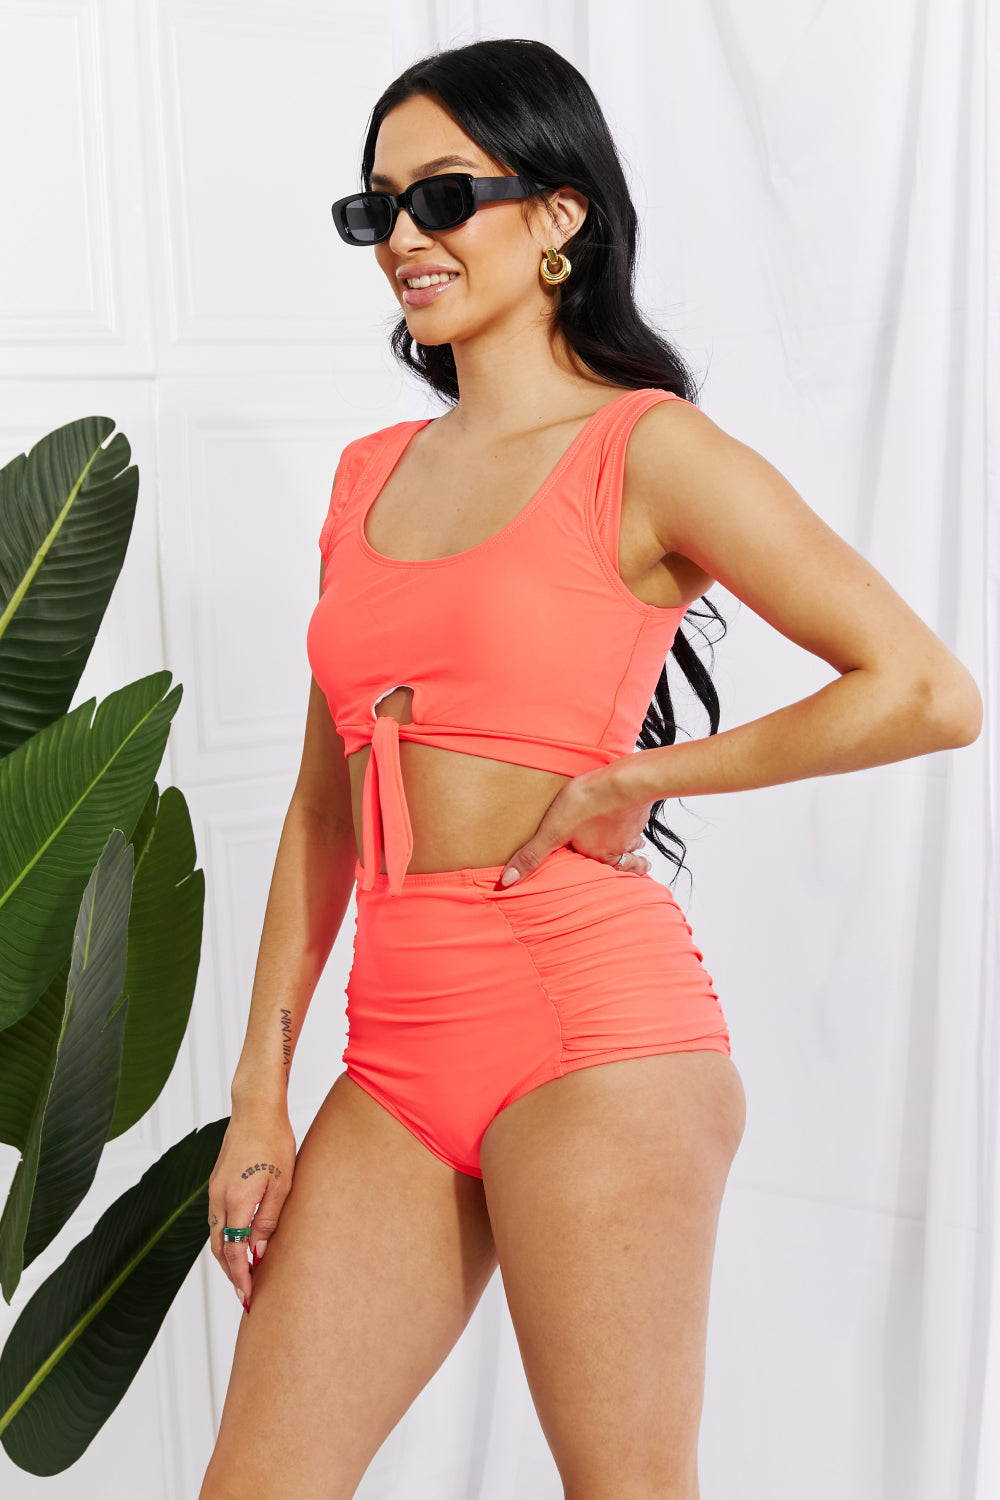 Sanibel Crop Swim Top and Ruched Bottoms Set in Coral - Kawaii Stop - Beach Beauty, Beach Fashion, Beachwear, Chic Bikini, Crop Swim Top, Customizable Fit, Marina West Swim, Polyester Spandex Blend, Retro Style, Ruched Bottoms, Scoop Neckline, Ship from USA, Solid Pattern, Swim, Swimsuits, Swimwear, Two Piece Swimsuits, Vacation Essentials, Women's Clothing, Women's Swimwear